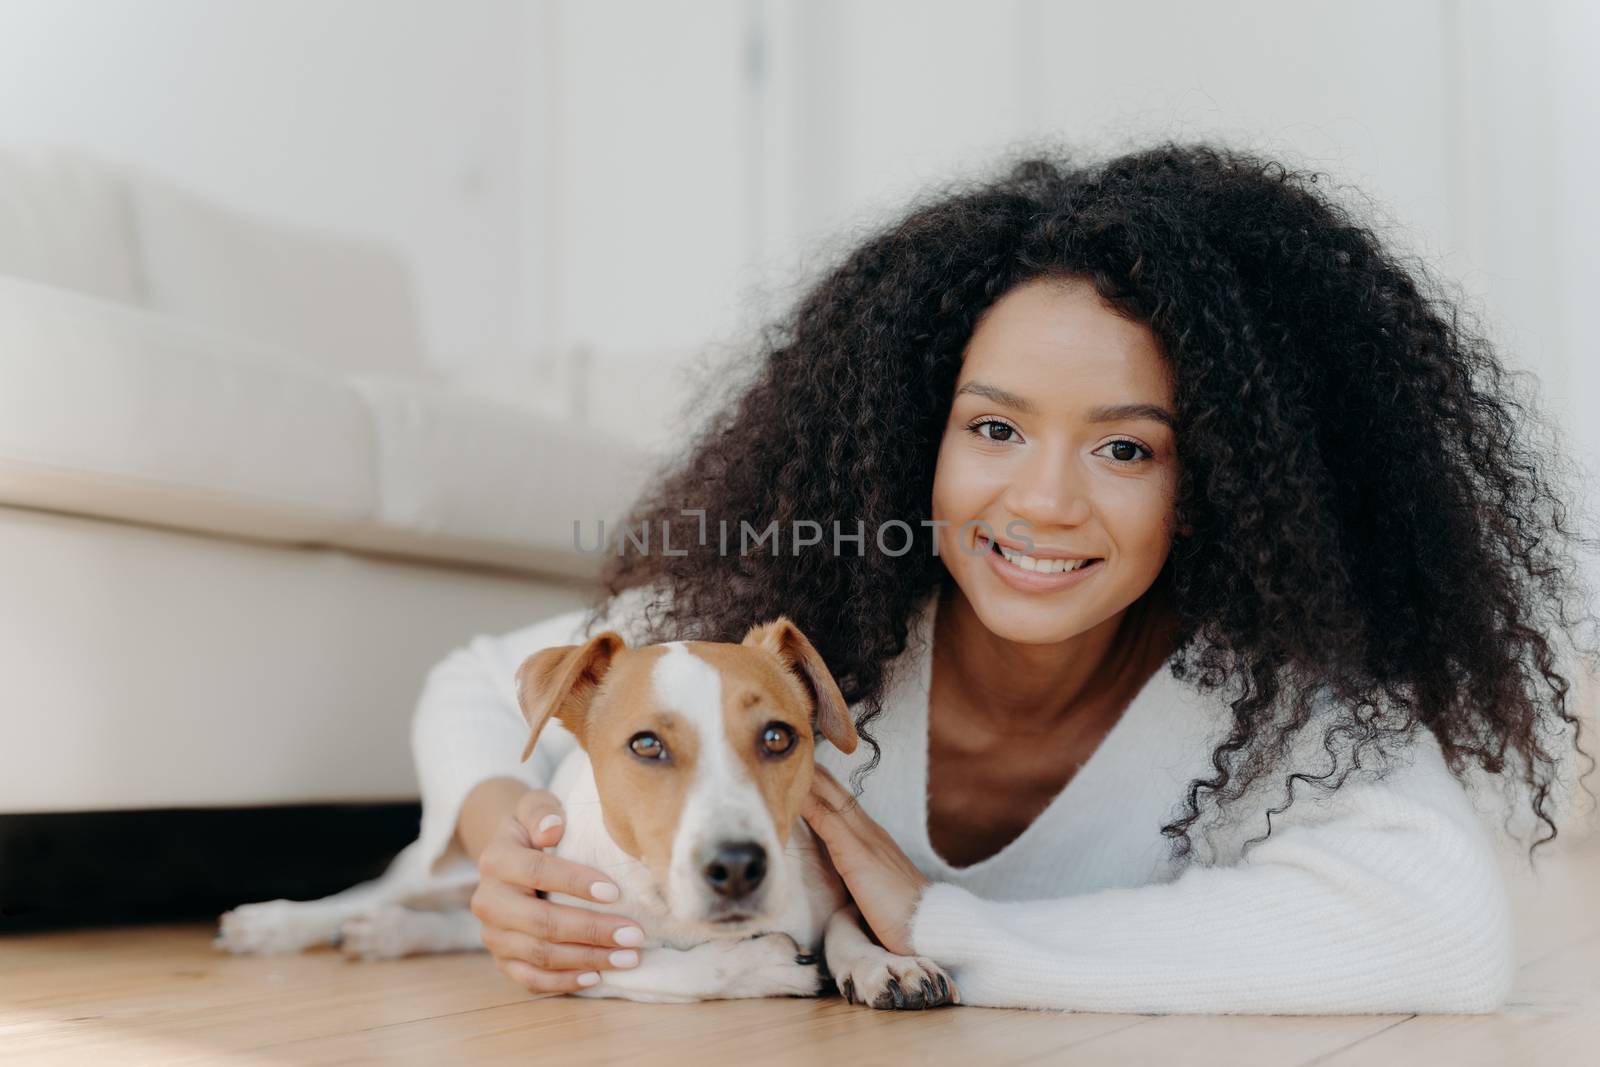 Pretty girl with Afro hair, lies on floor with dog, expresses pleasant emotions, poses in living room near couch, bought pet in new apartment. Woman host with beloved animal at home, share good moment by vkstock